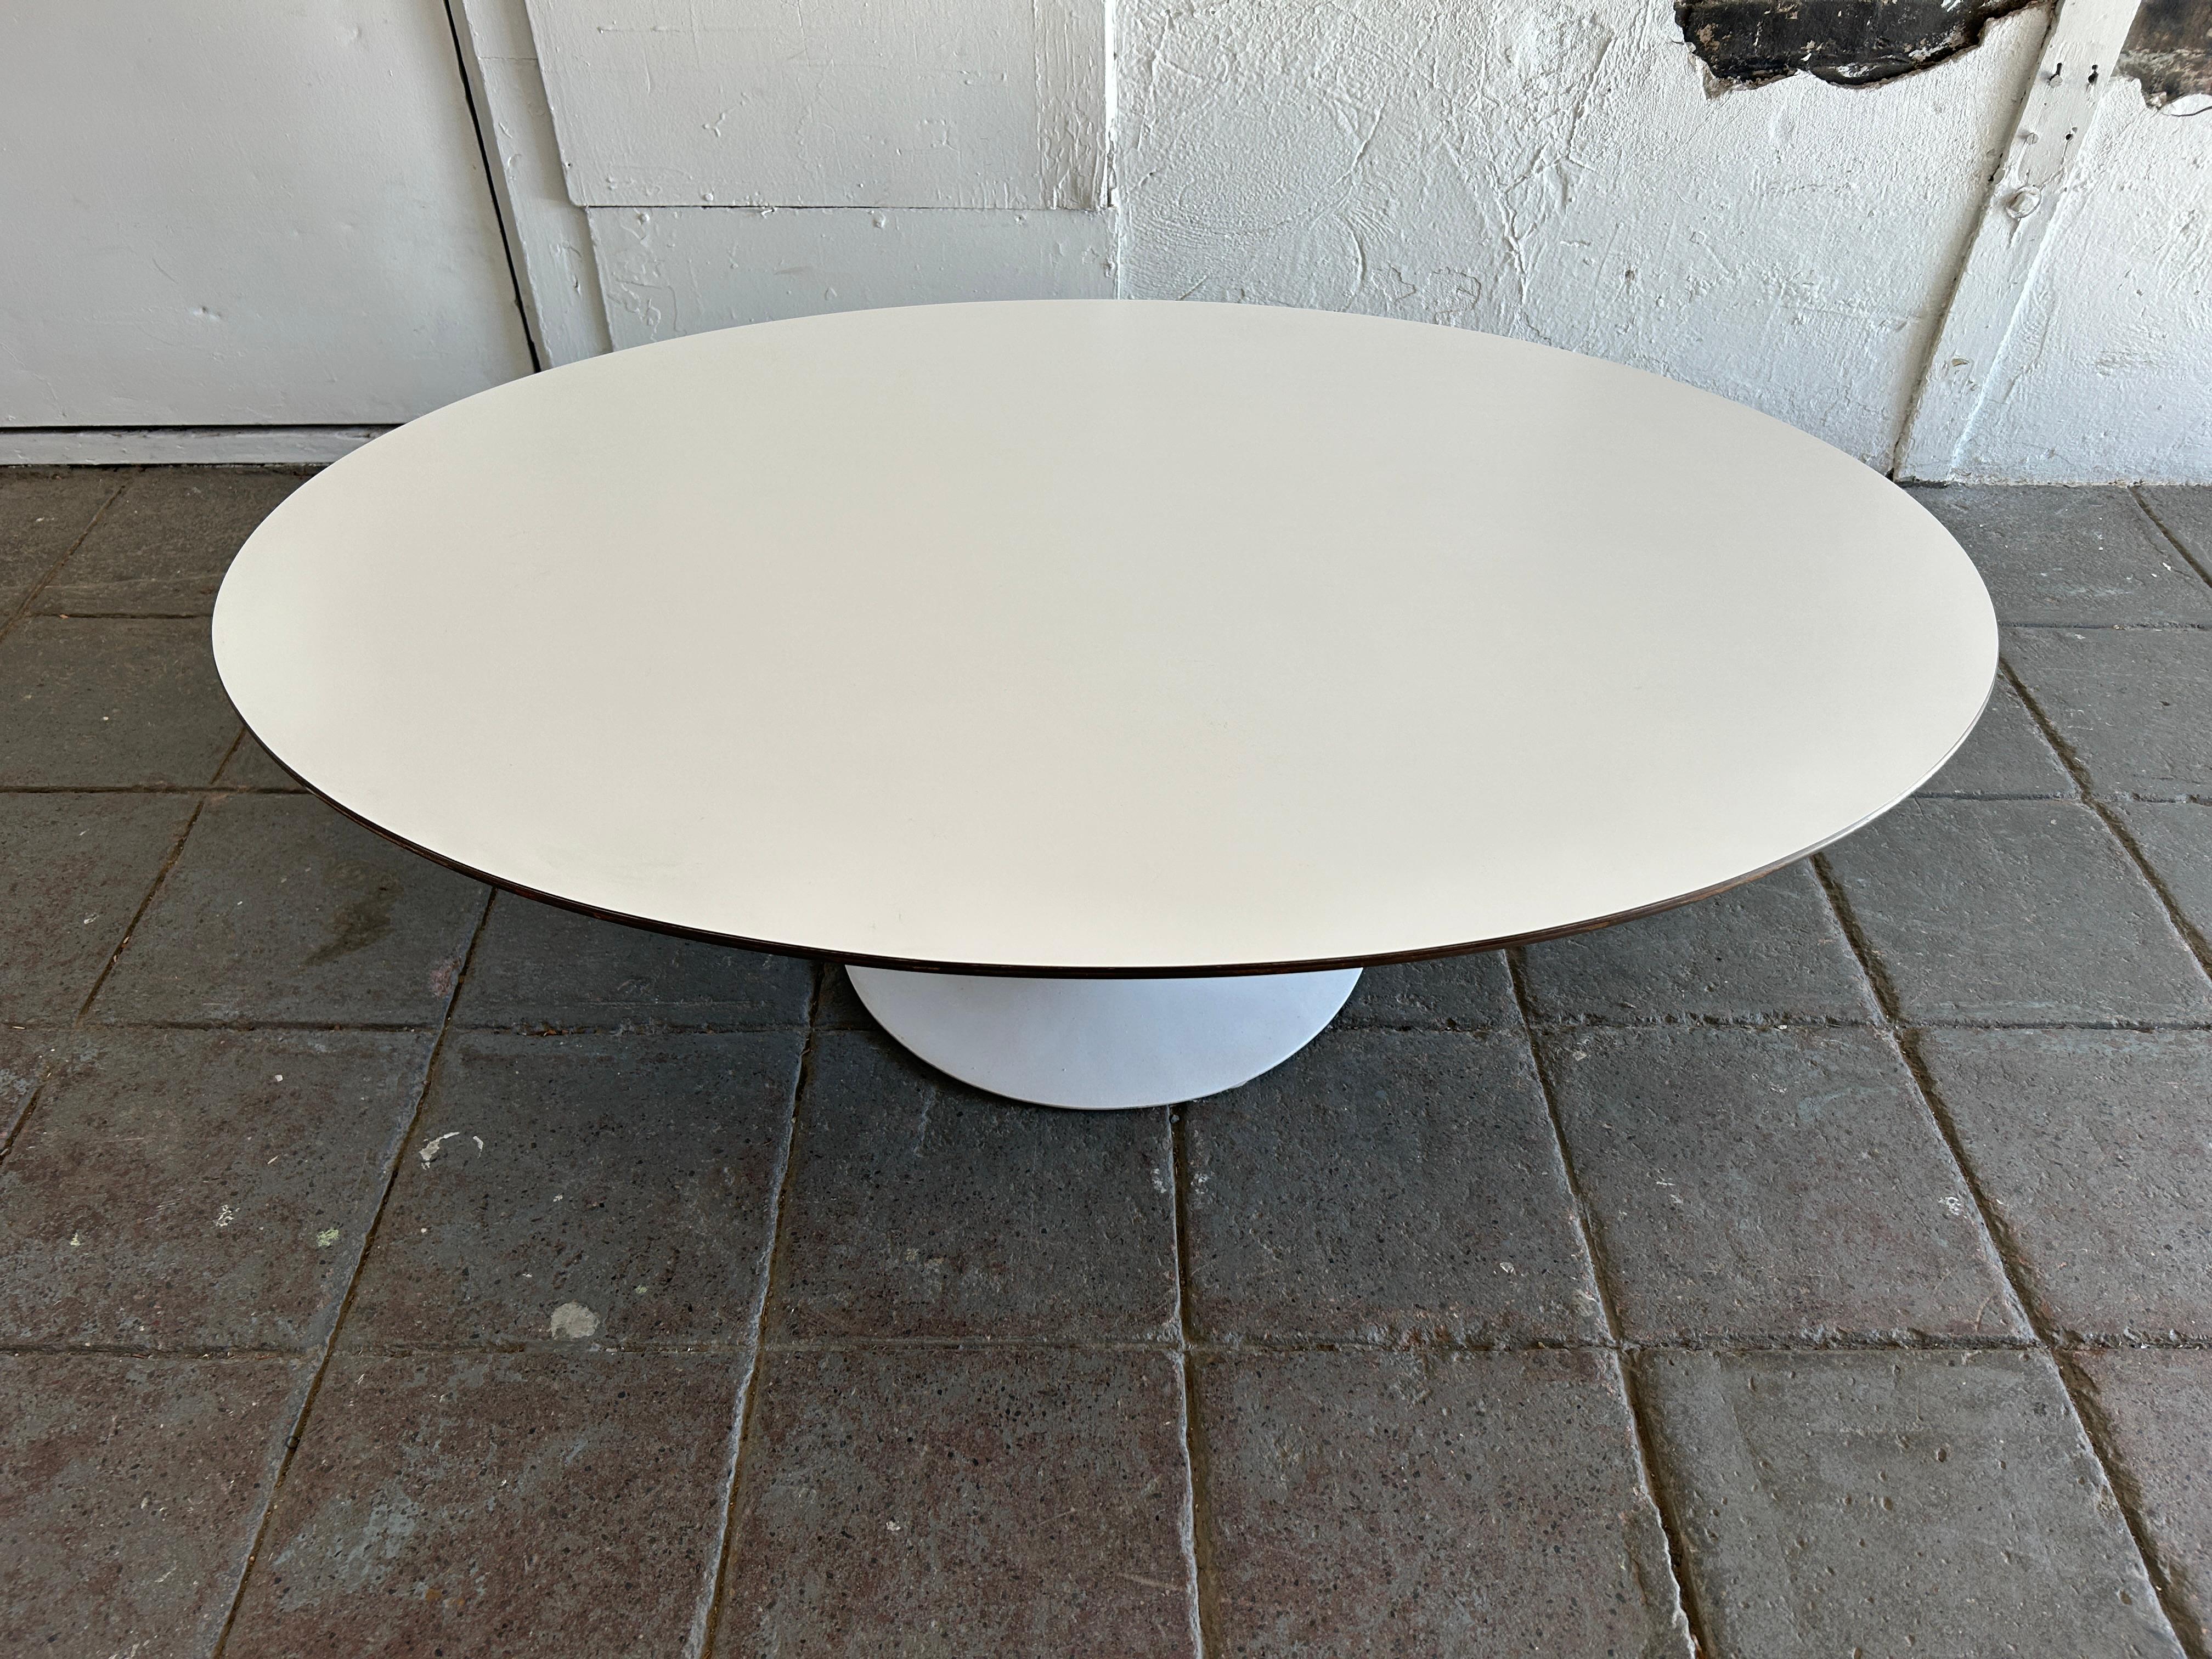 Mid-Century Modern knoll oval tulip coffee table white Laminate top. Base is very heavy and has has original off white paint. Has original threaded center for base. Numbered on base. Has tapered edge on table top. Designed by Eero Saarinen for